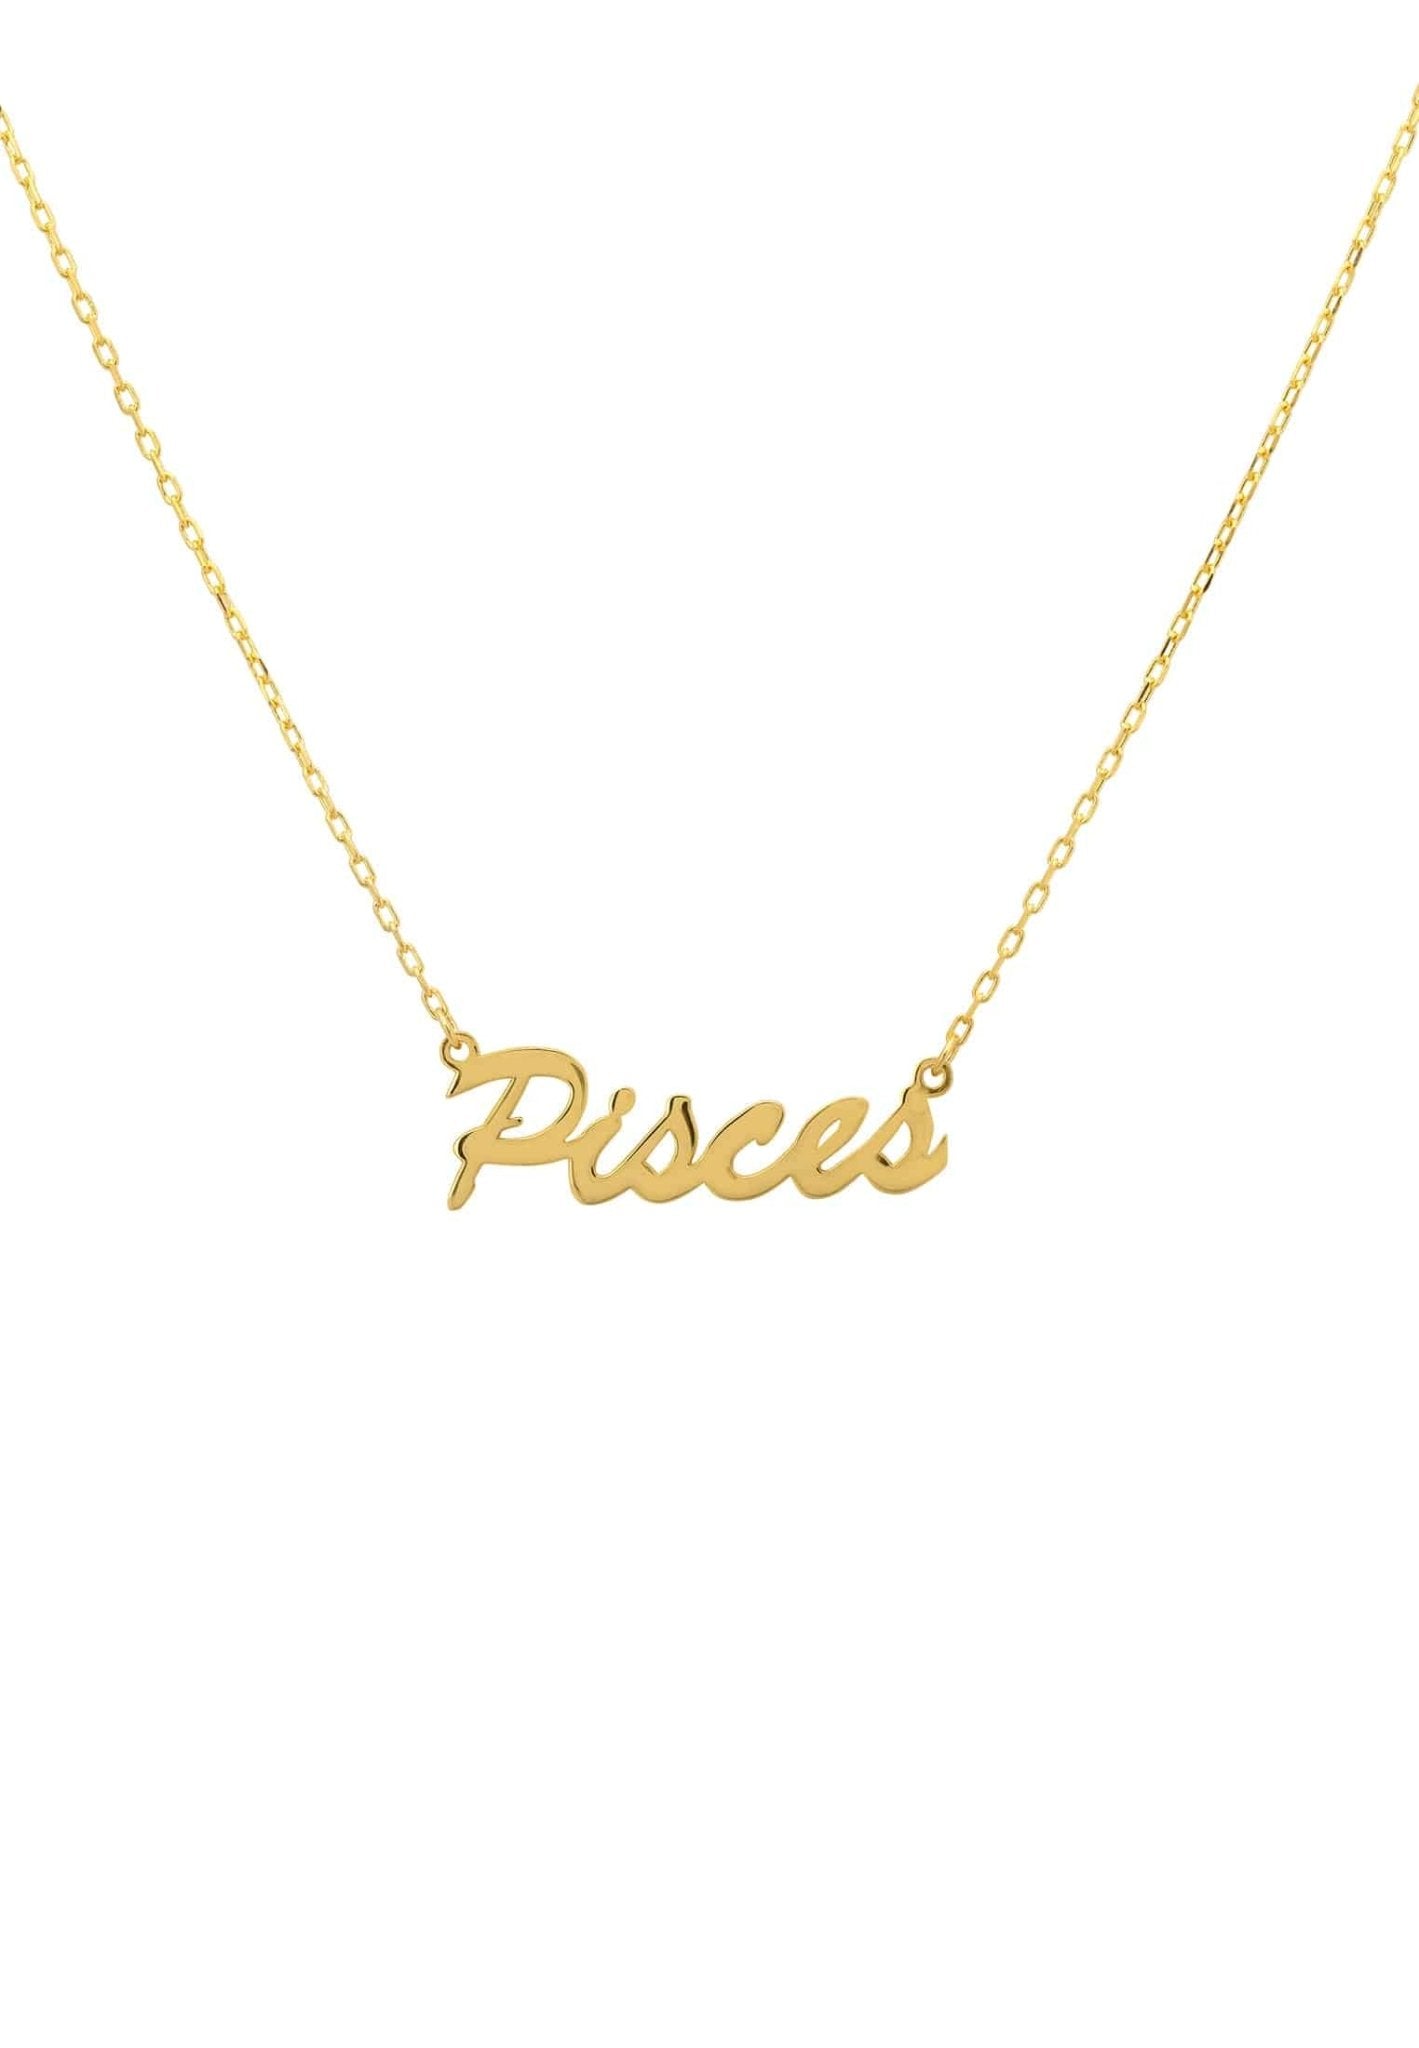 Personalized Necklaces - Zodiac Star Sign Name Necklace Gold Pisces 